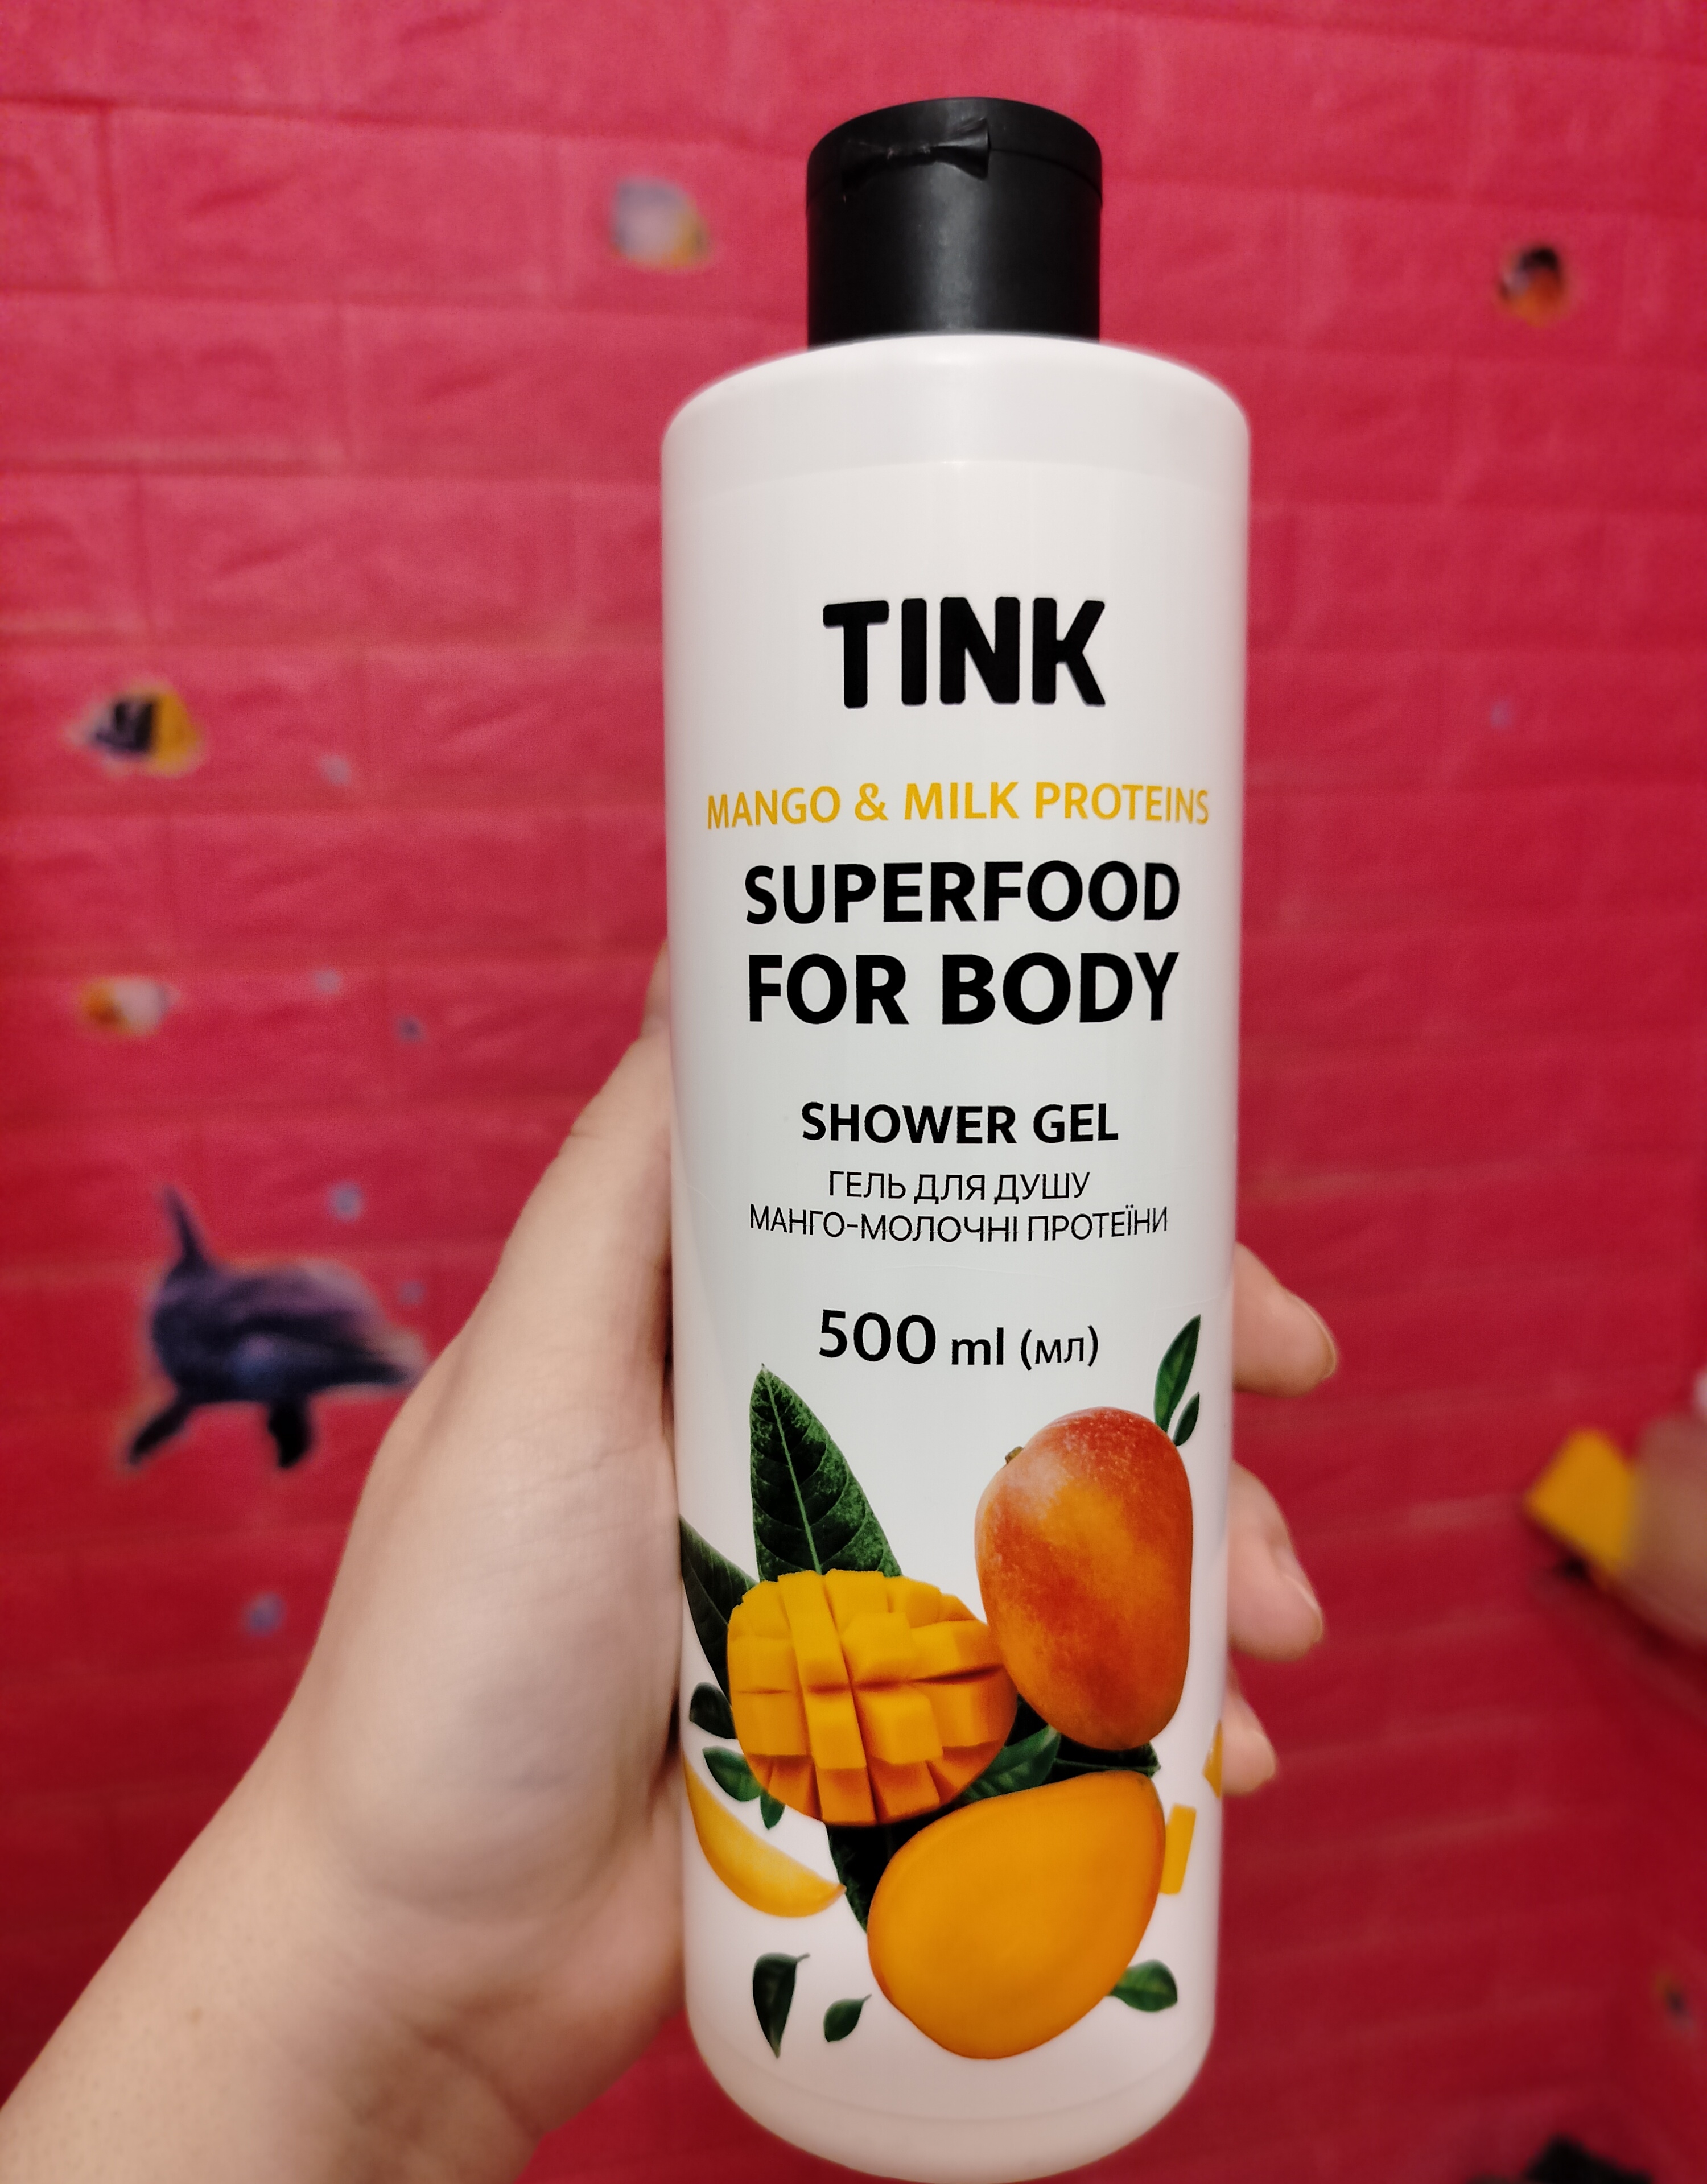 Tink Superfood for body